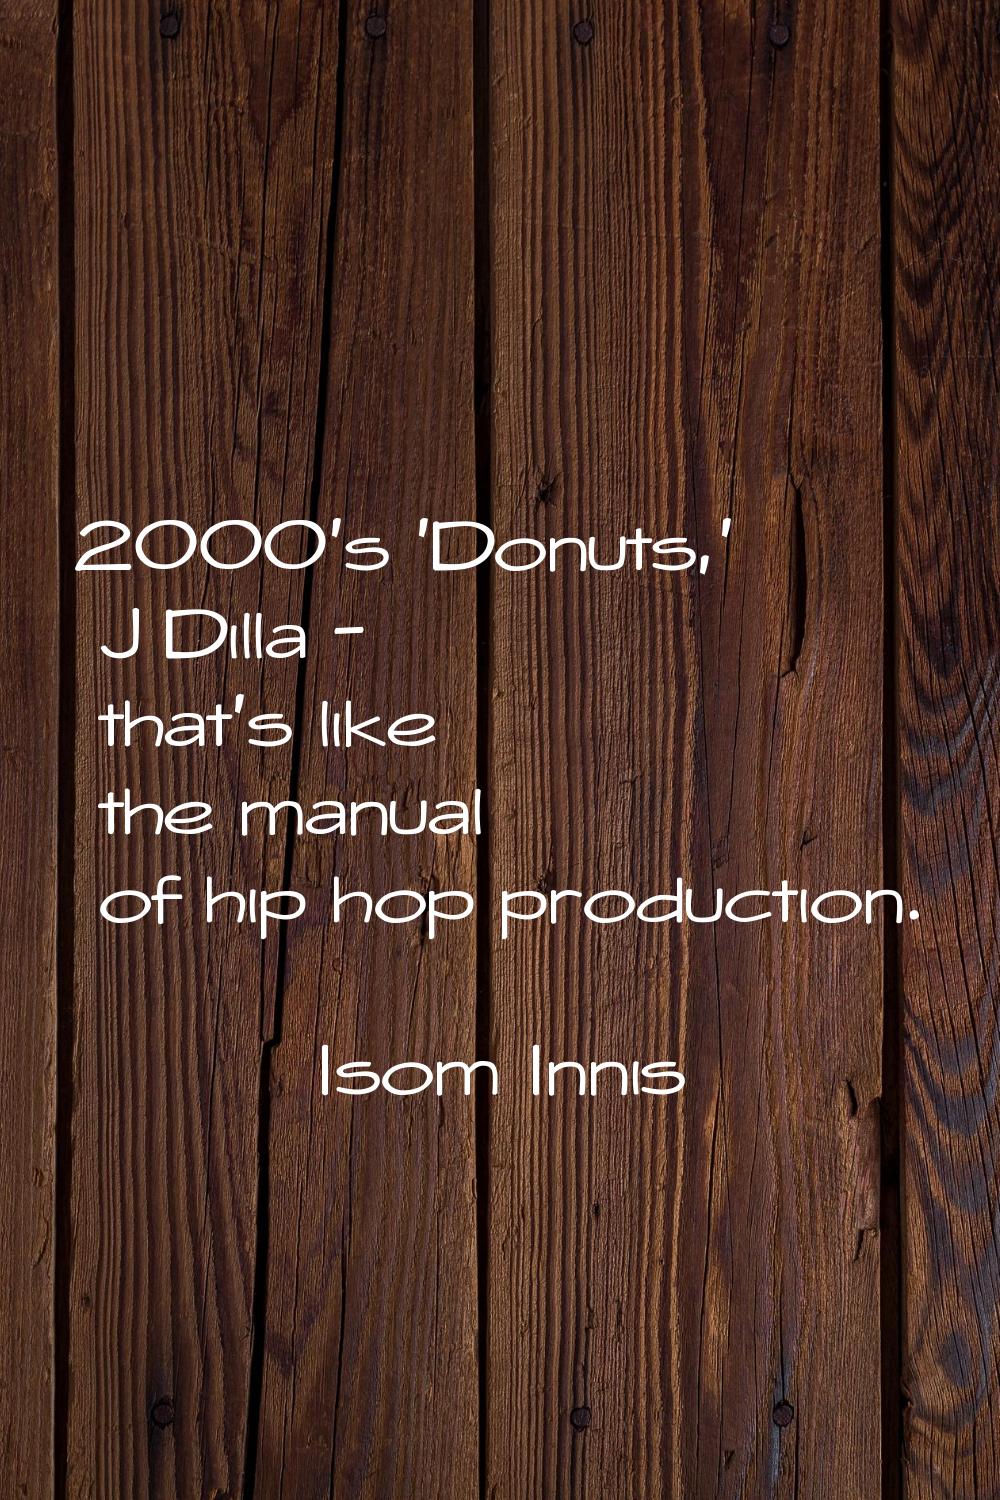 2000's 'Donuts,' J Dilla - that's like the manual of hip hop production.